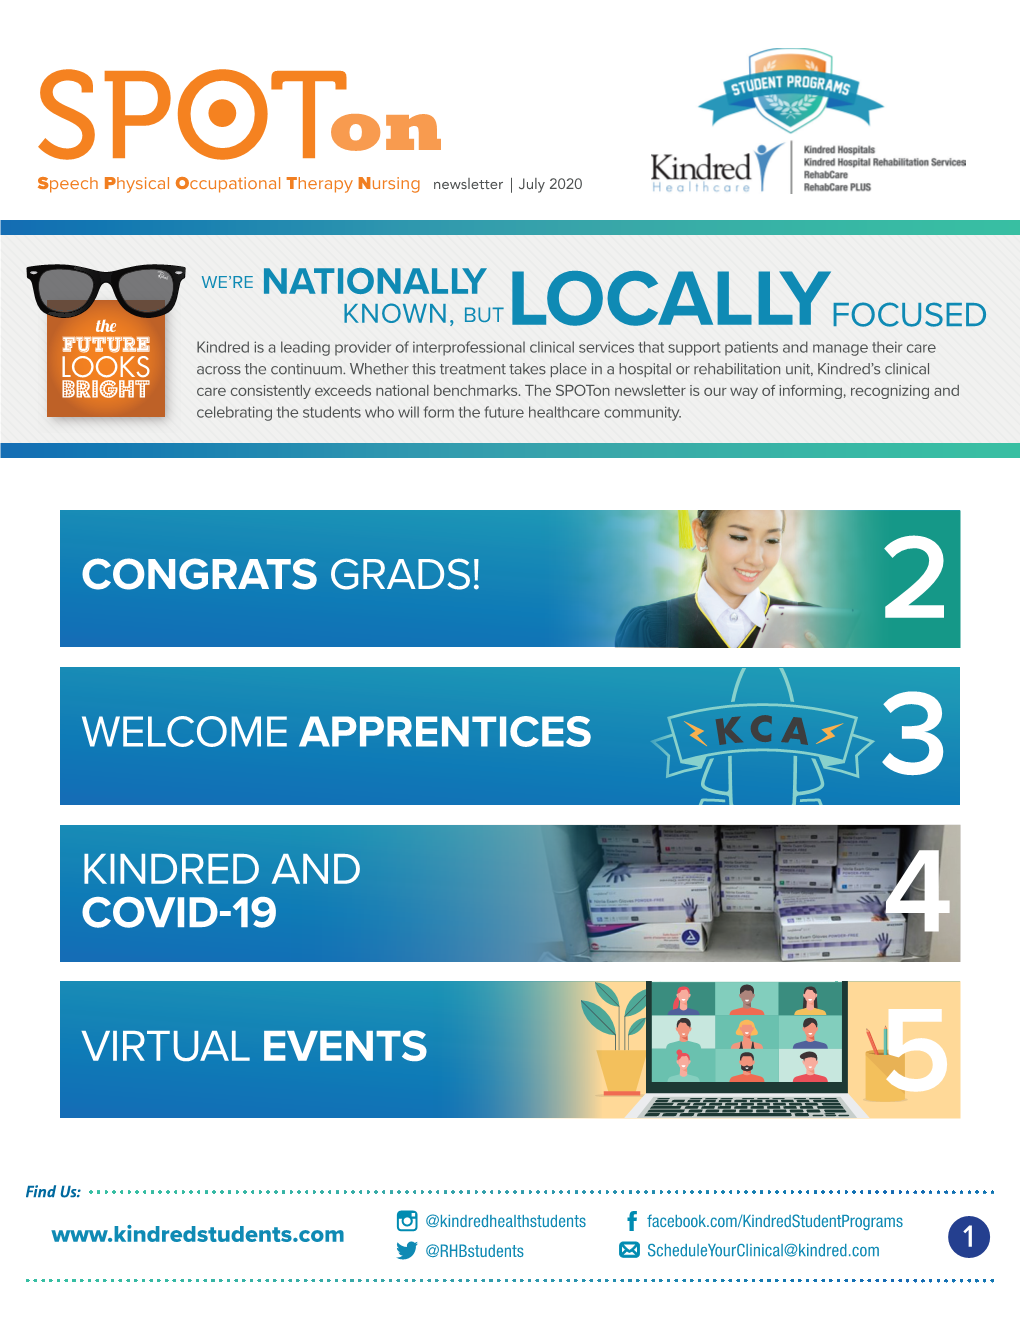 Welcome Apprentices Congrats Grads! Virtual Events Kindred and Covid-19